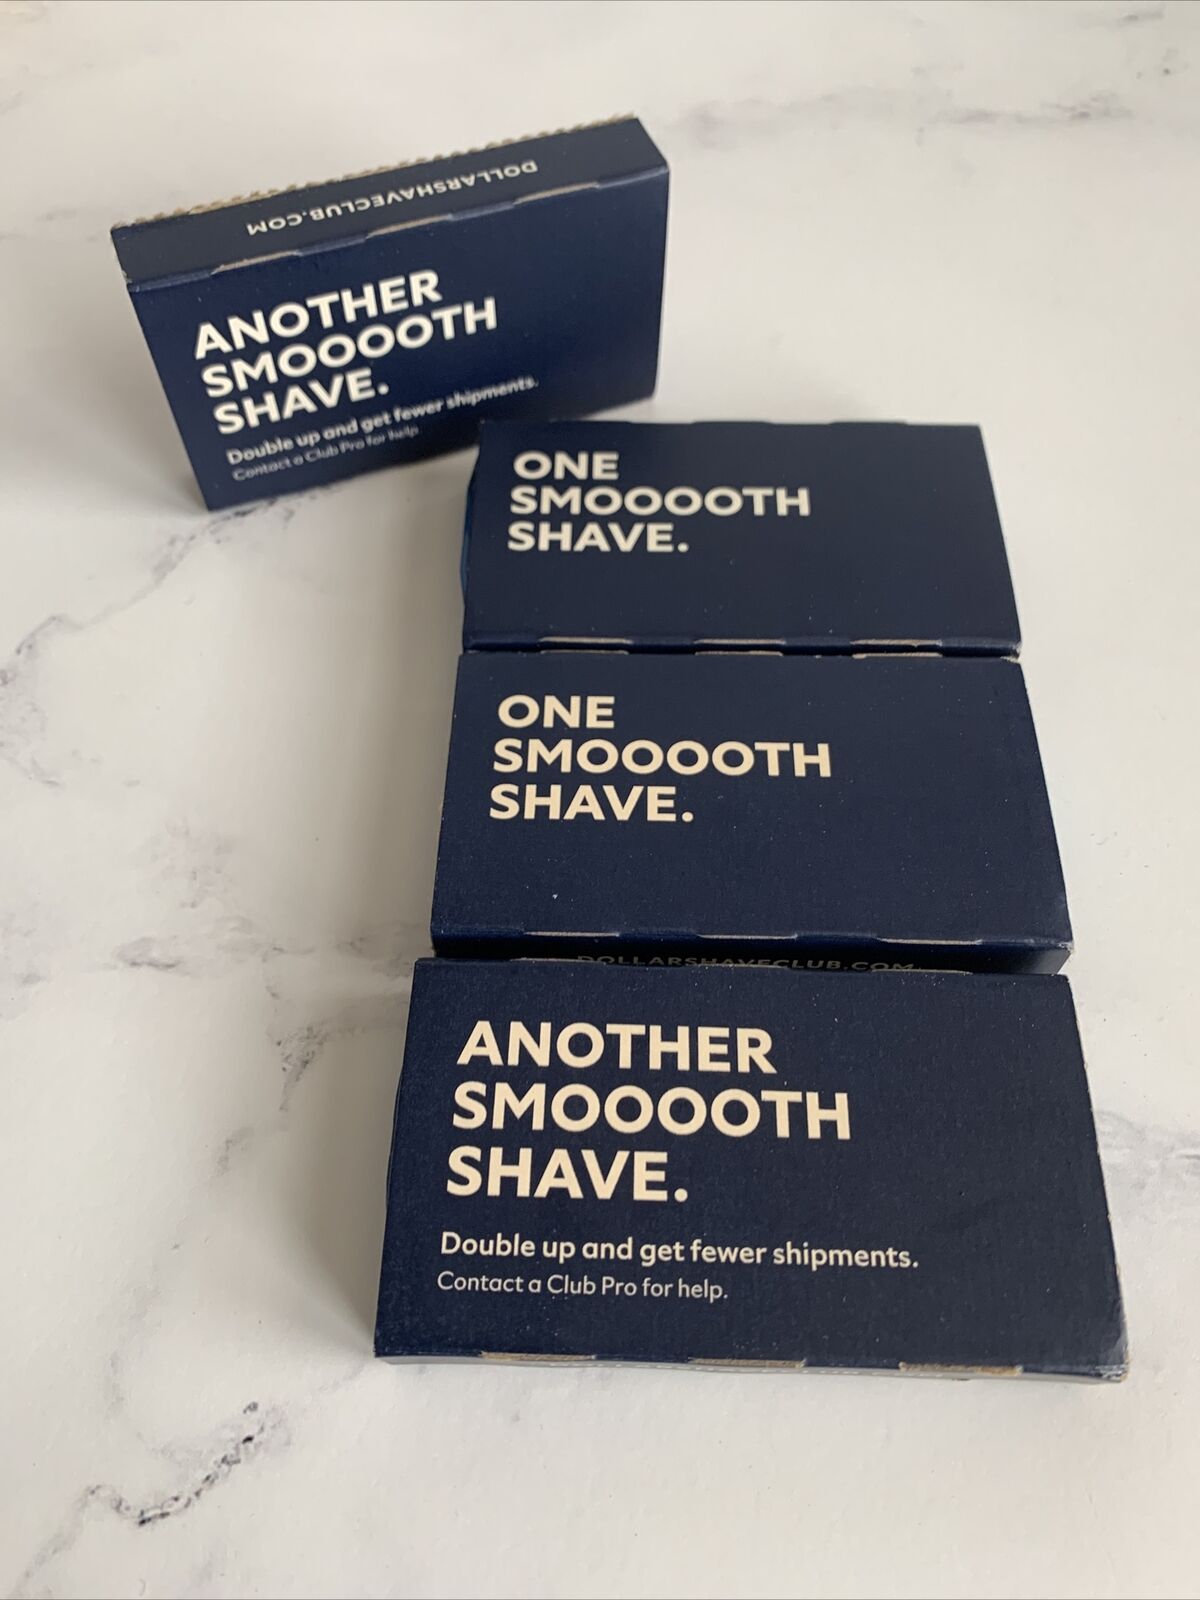 DOLLAR SHAVE CLUB  RAZORS "EXECUTIVE" 6 BLADE 4 Packs = 16 CARTRIDGES Dollar Shave Club Does Not Apply